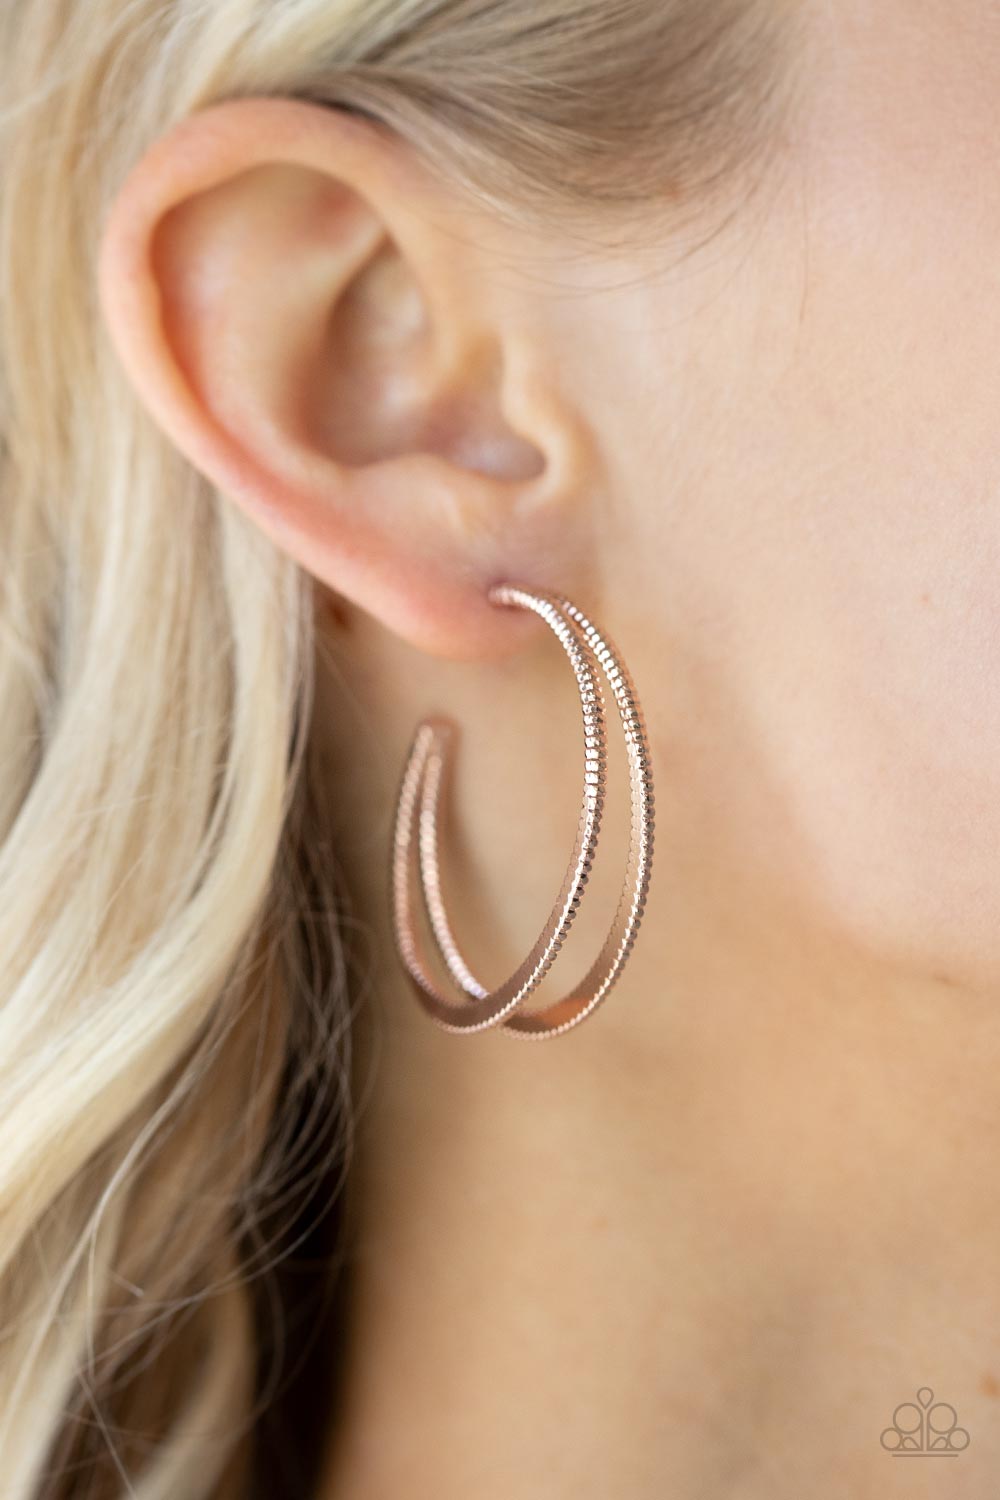 Rustic Curves - Rose Gold - Pretykimsbling